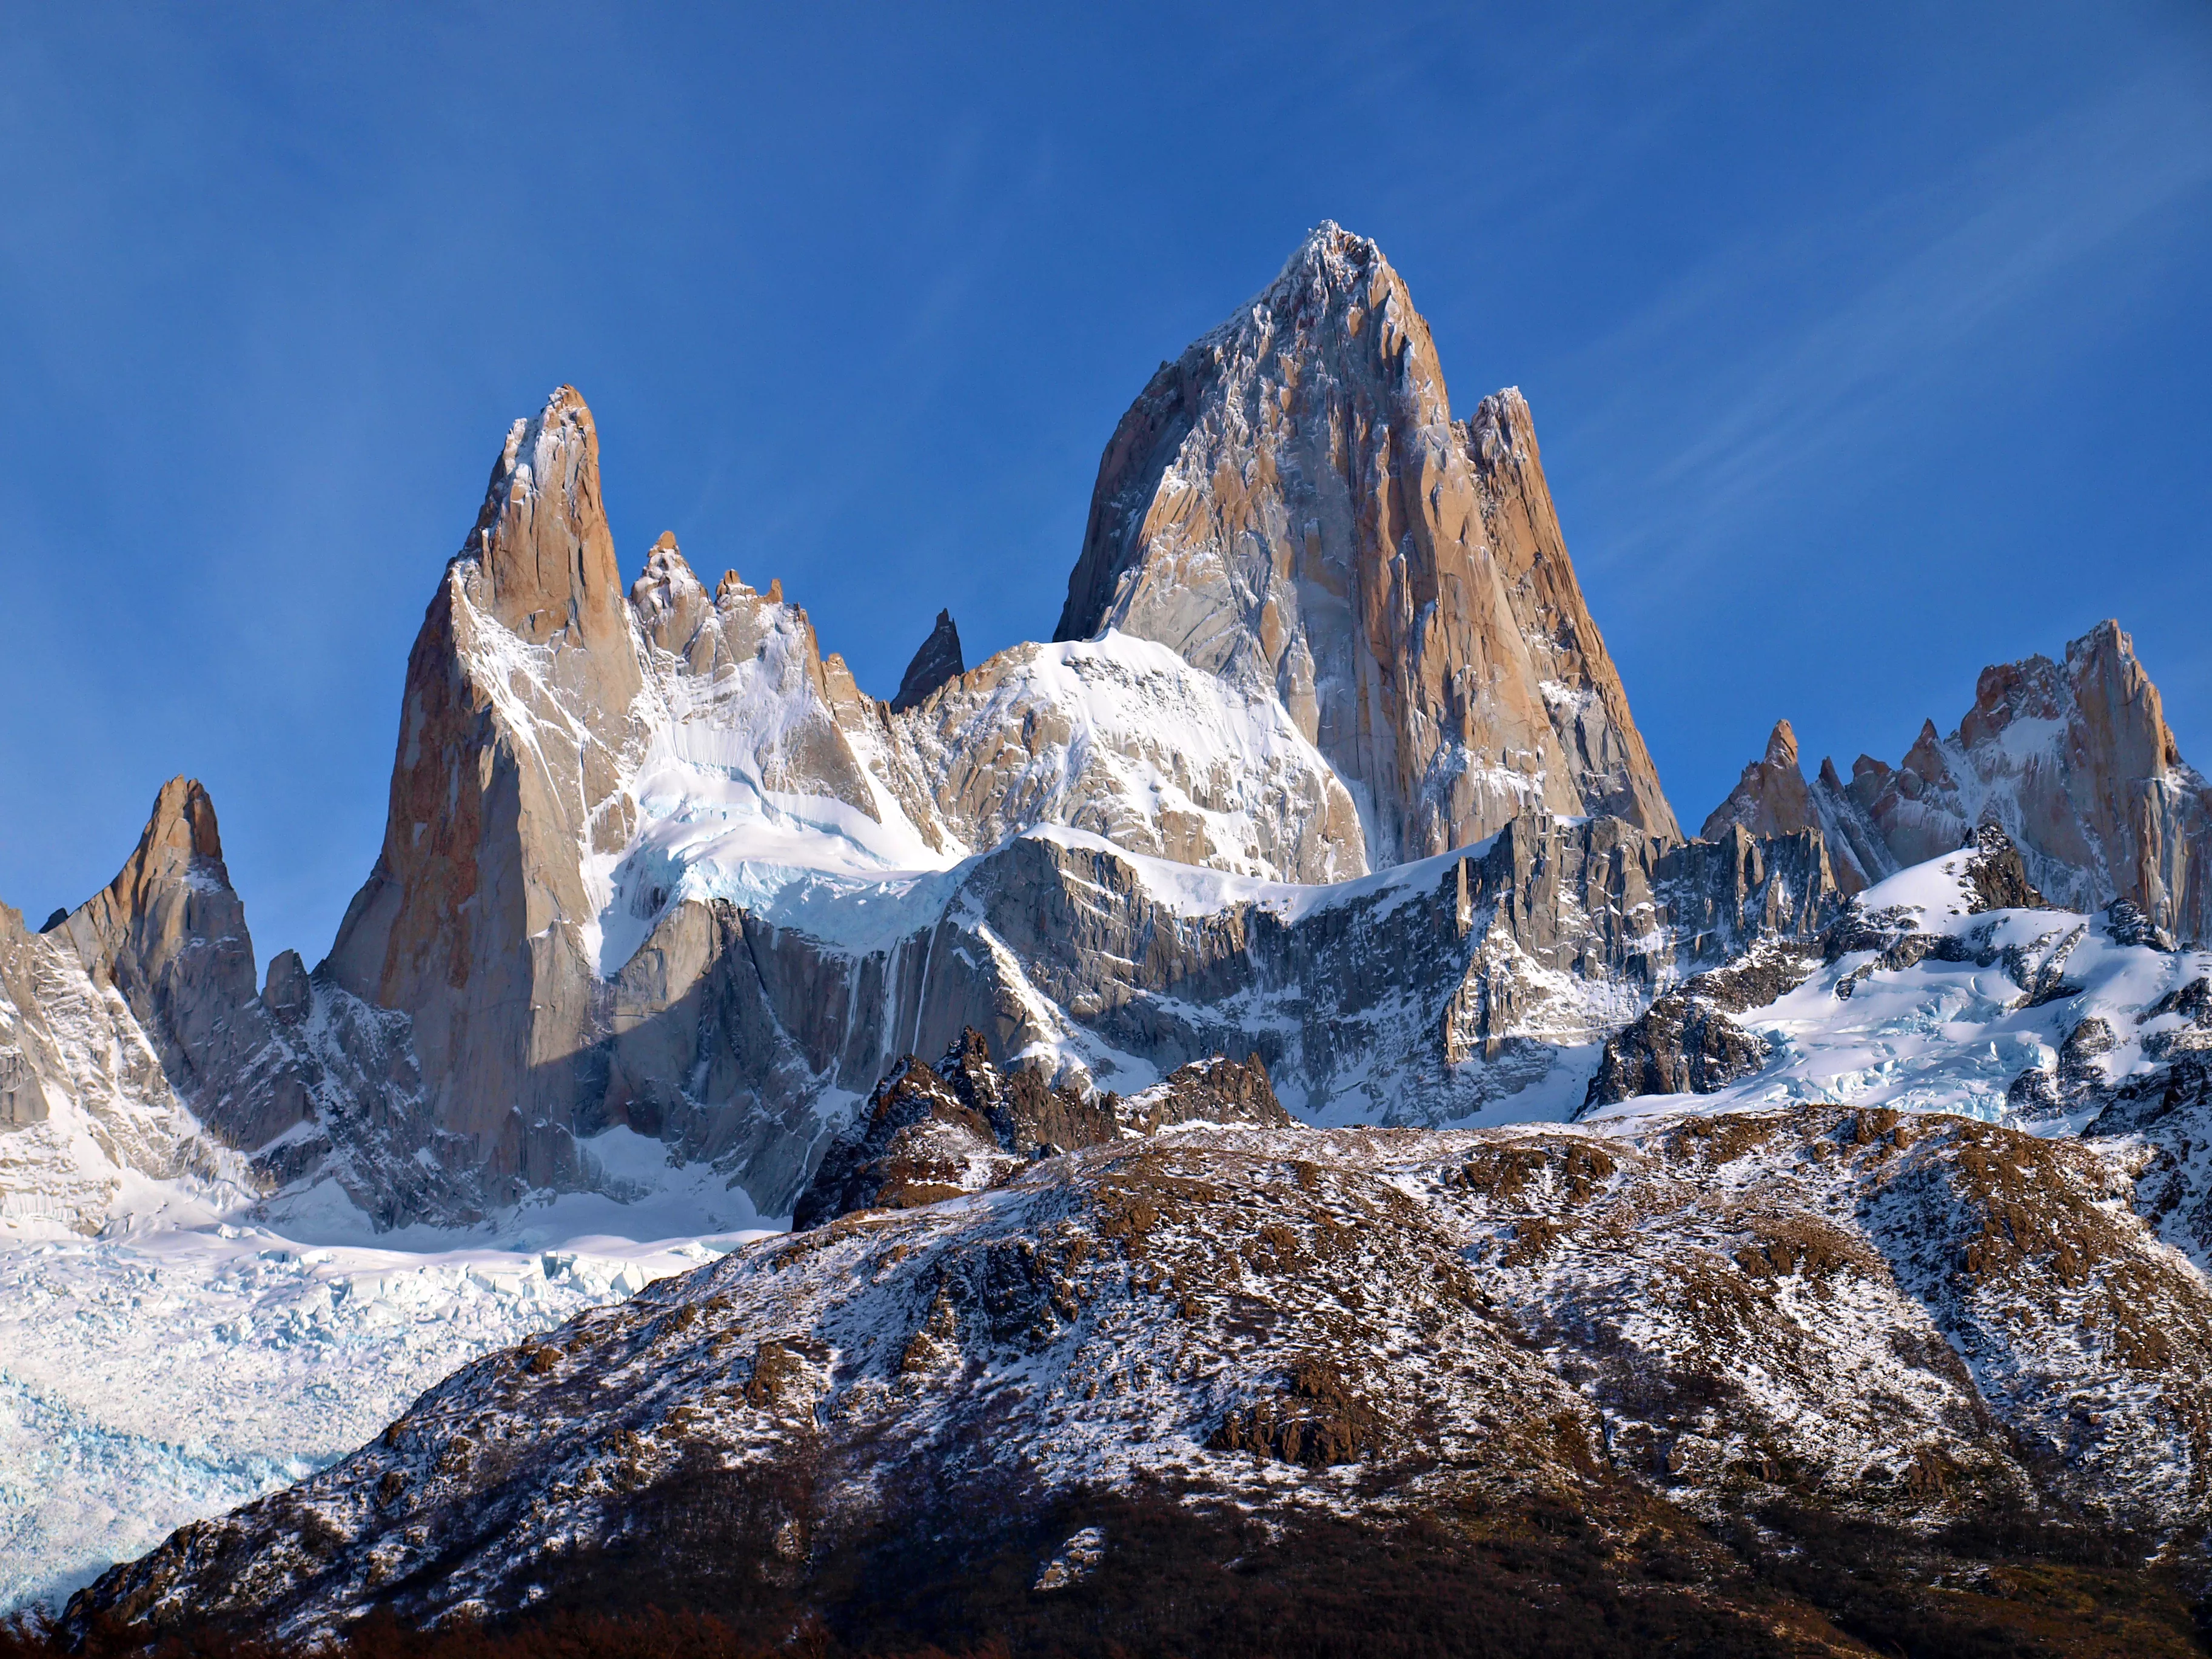 Mount Fitz Roy in Argentina, South America | Mountaineering,Mountains,Trekking & Hiking - Rated 4.1